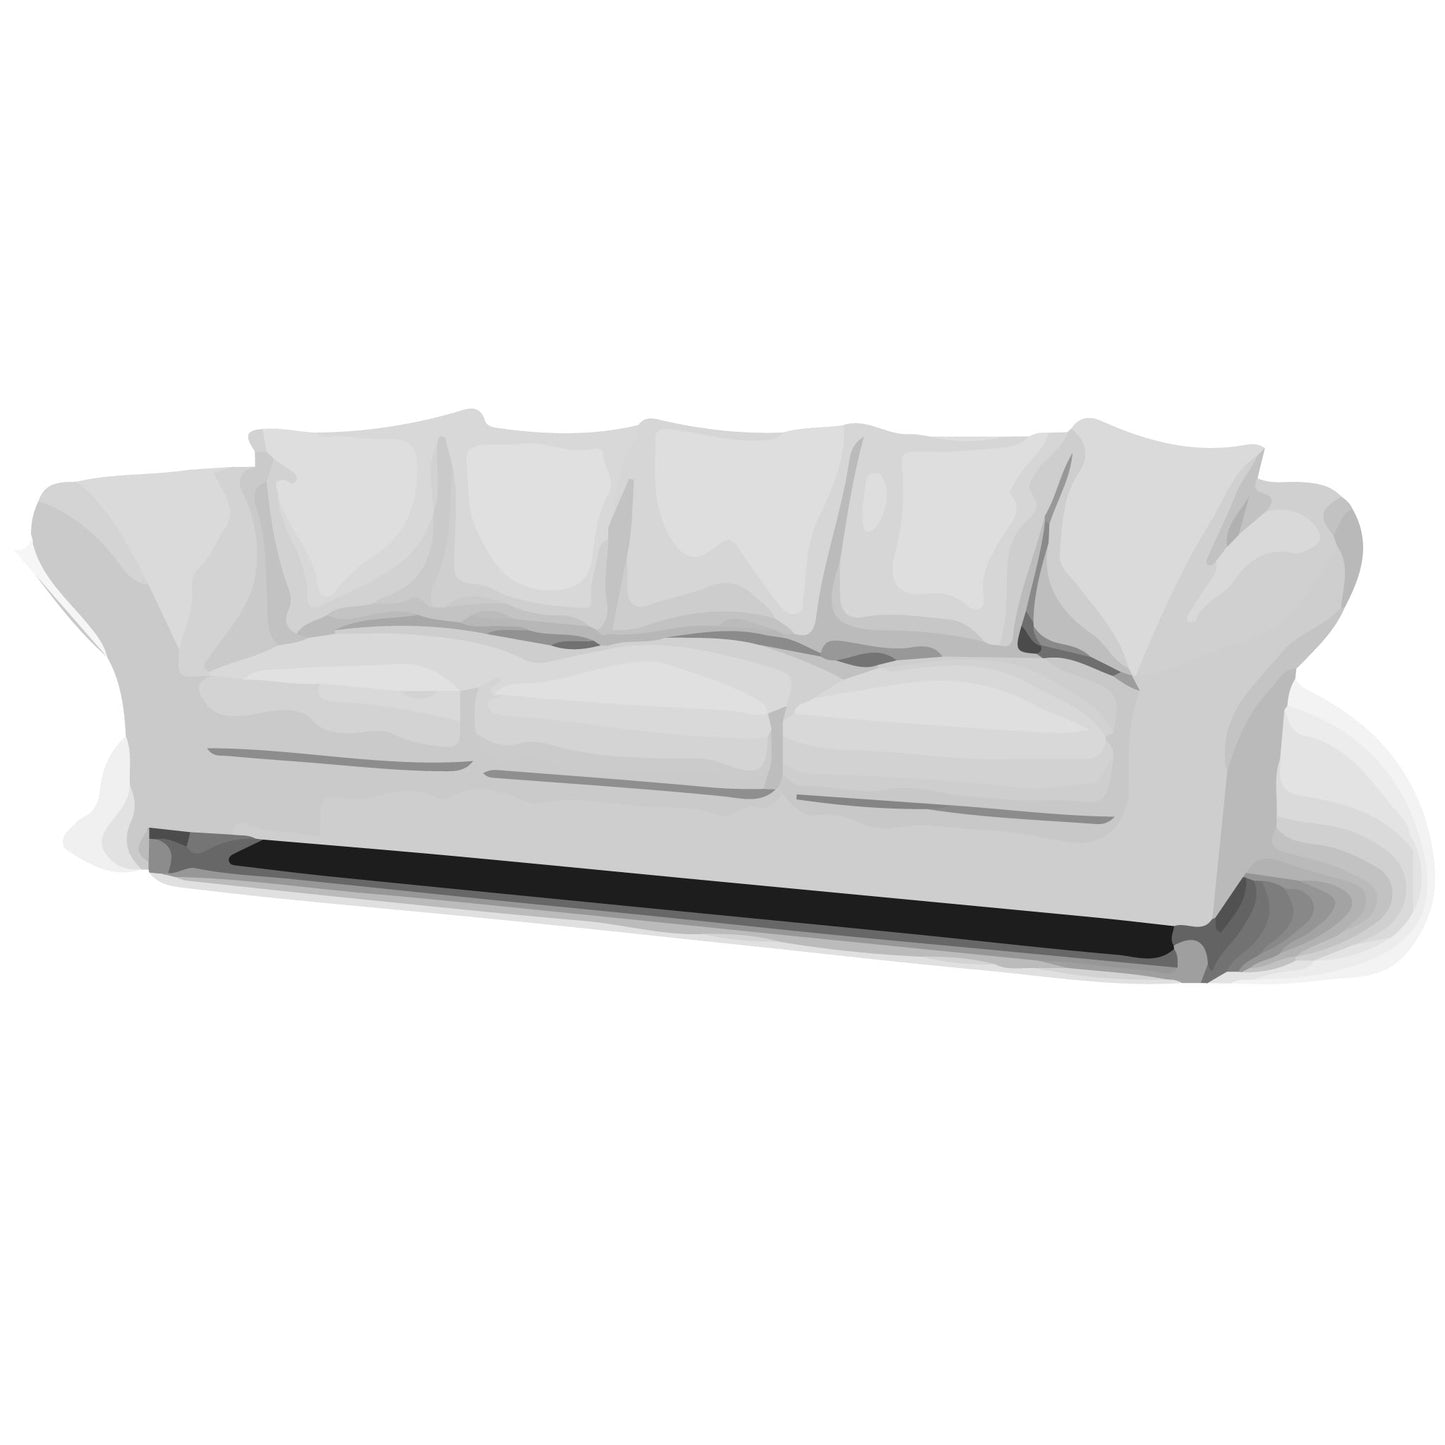 Backa 2.5 Seater Sofa Cover